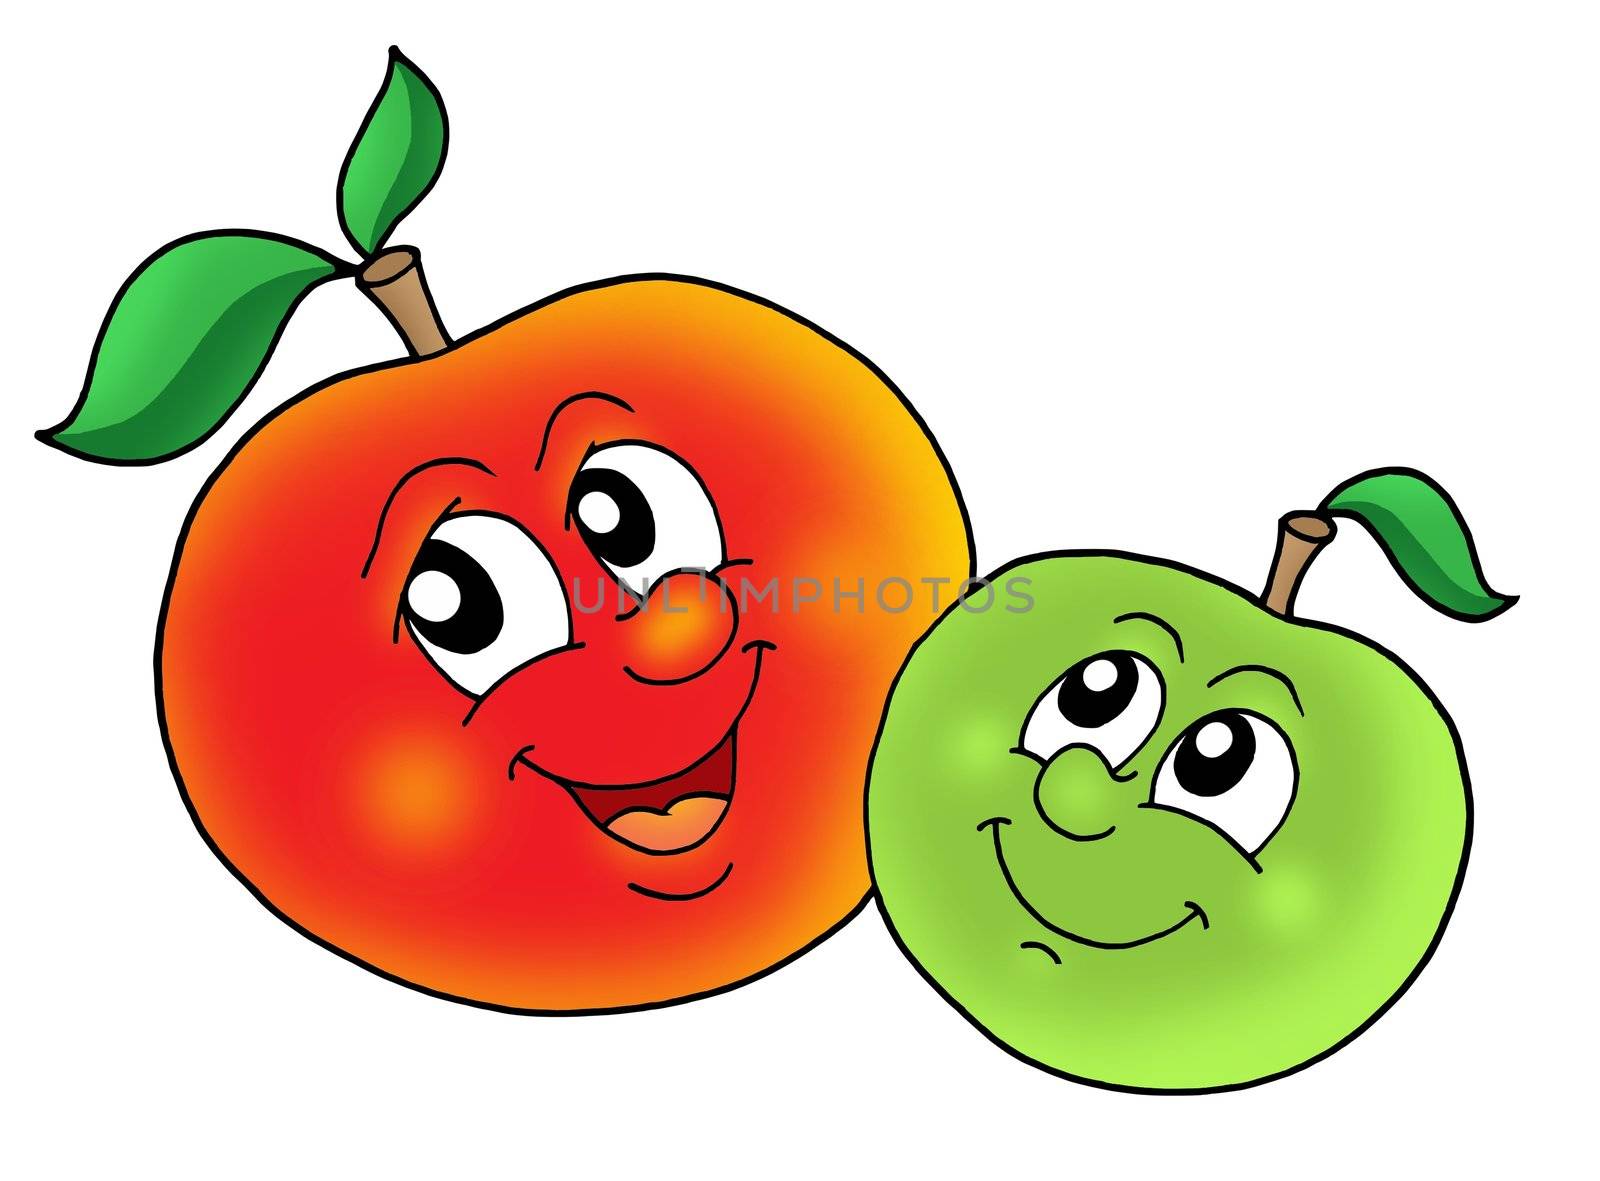 Pair of smiling apples - color illustration.